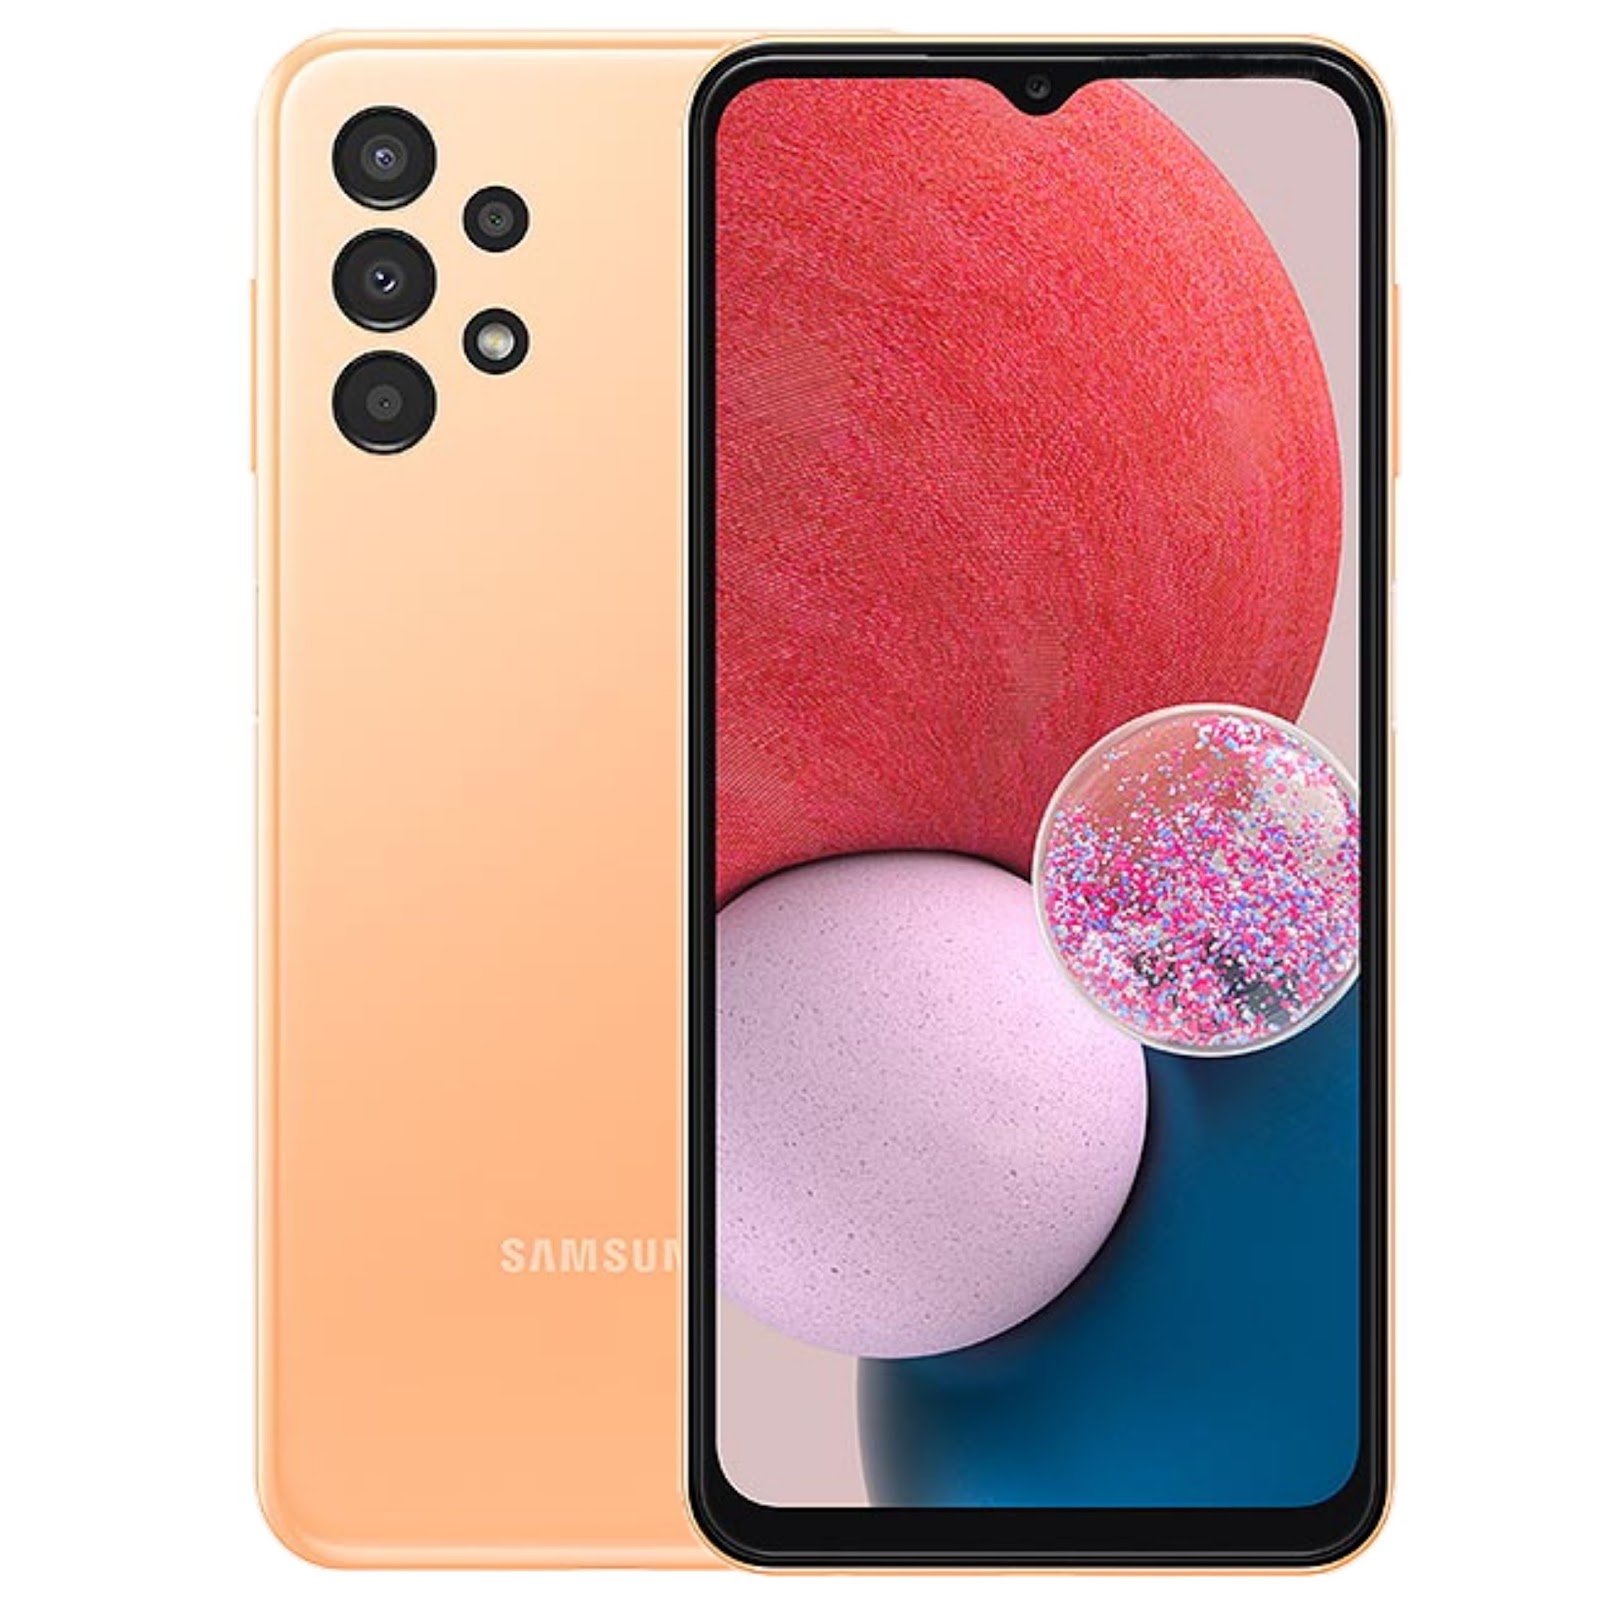 poster Samsung Galaxy A13 (4G) Price in Bangladesh Official/Unofficial 2022